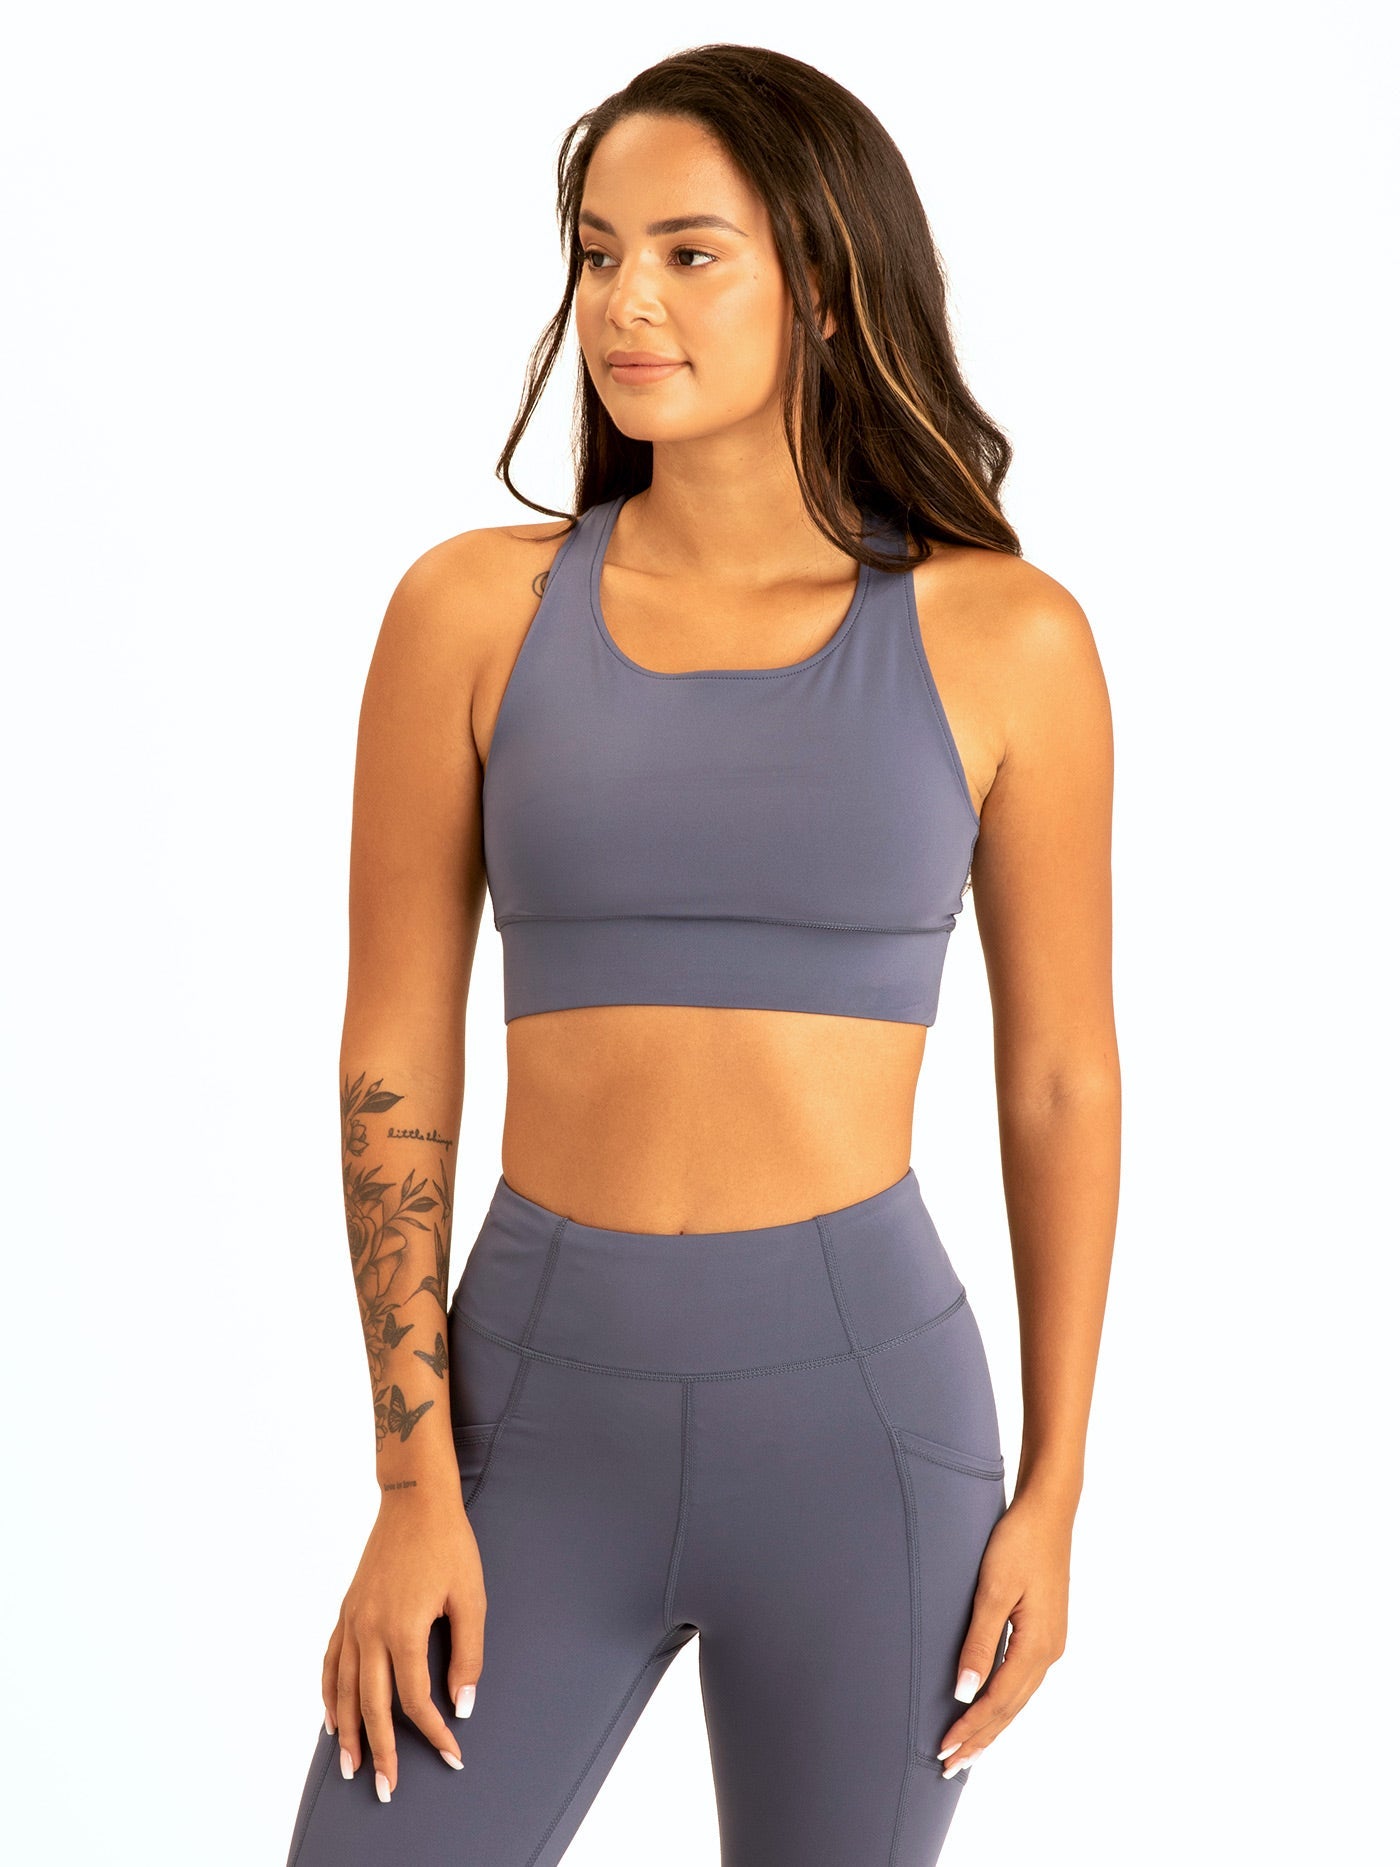 Strappy Sports Bra Womens Tops Sports Bra Threads 4 Thought 